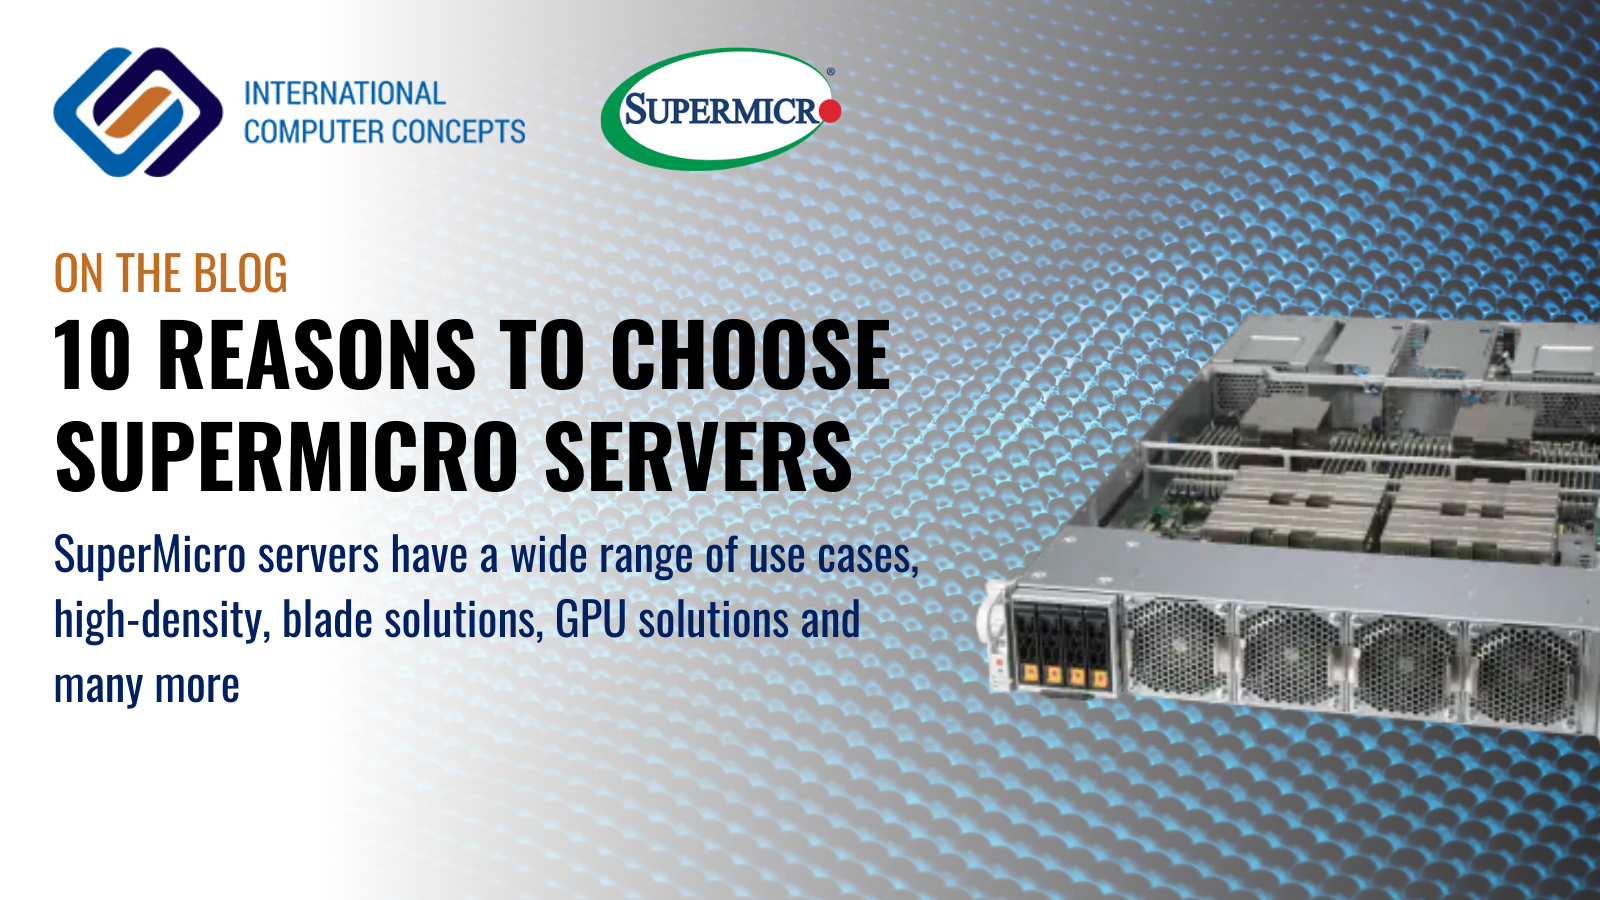 Ten reasons why you should use SuperMicro servers